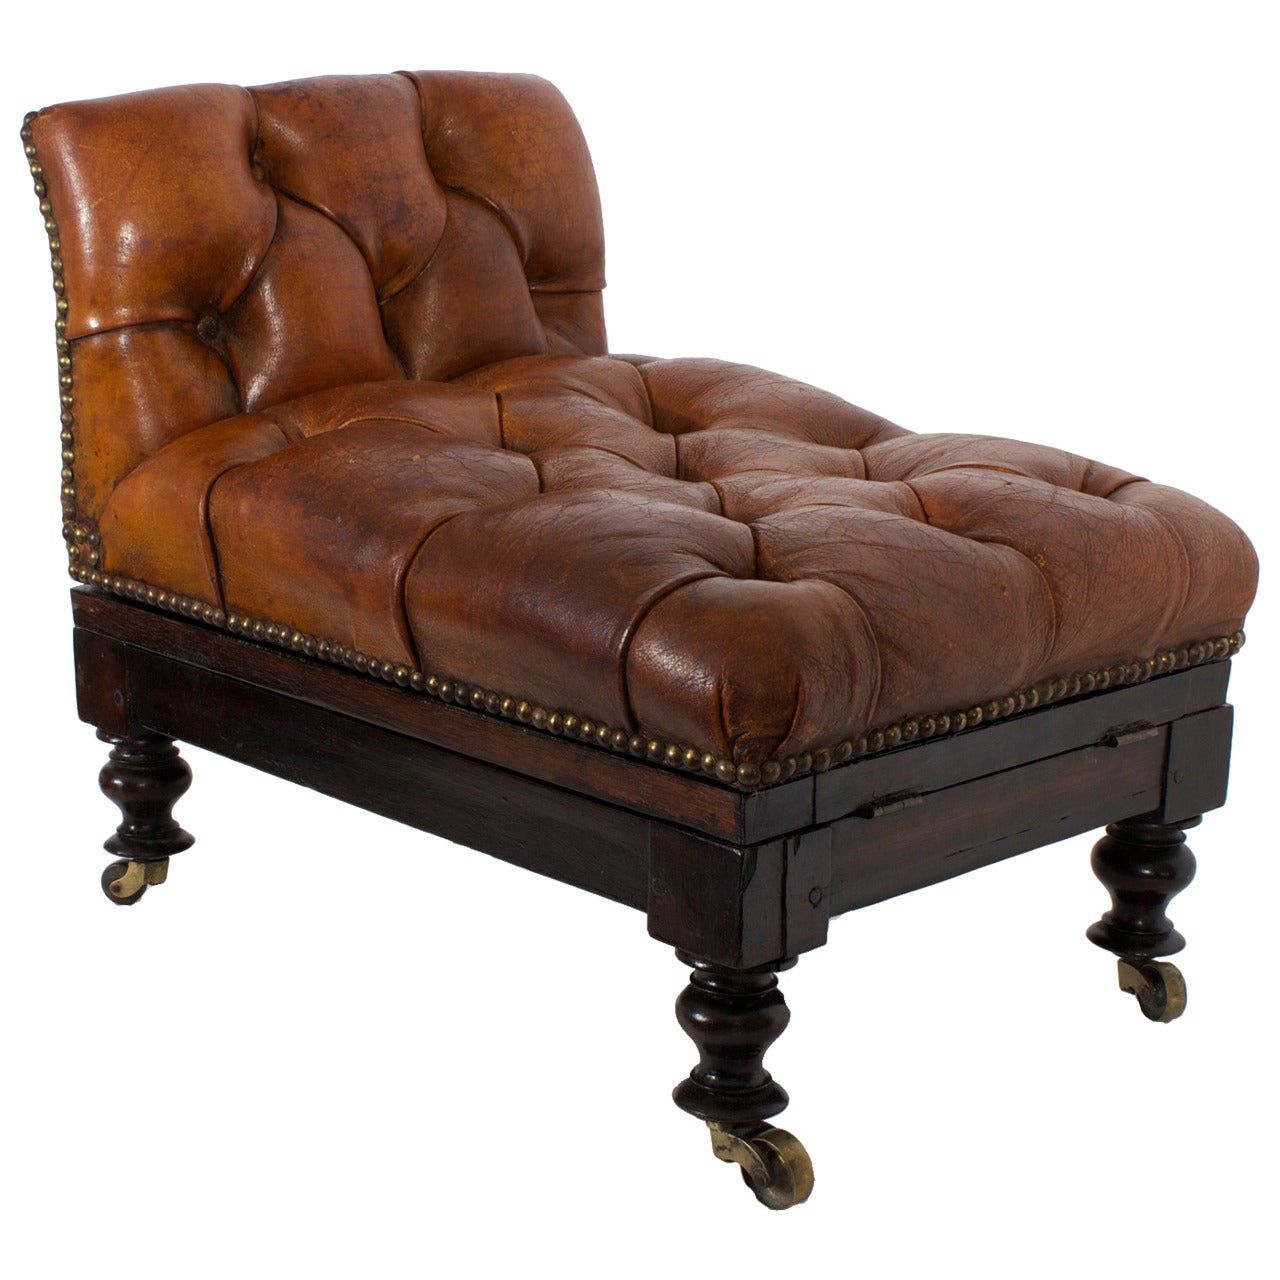 19th Century Tufted Leather Foot Stool or Bench, with Raising Capabilities For Sale